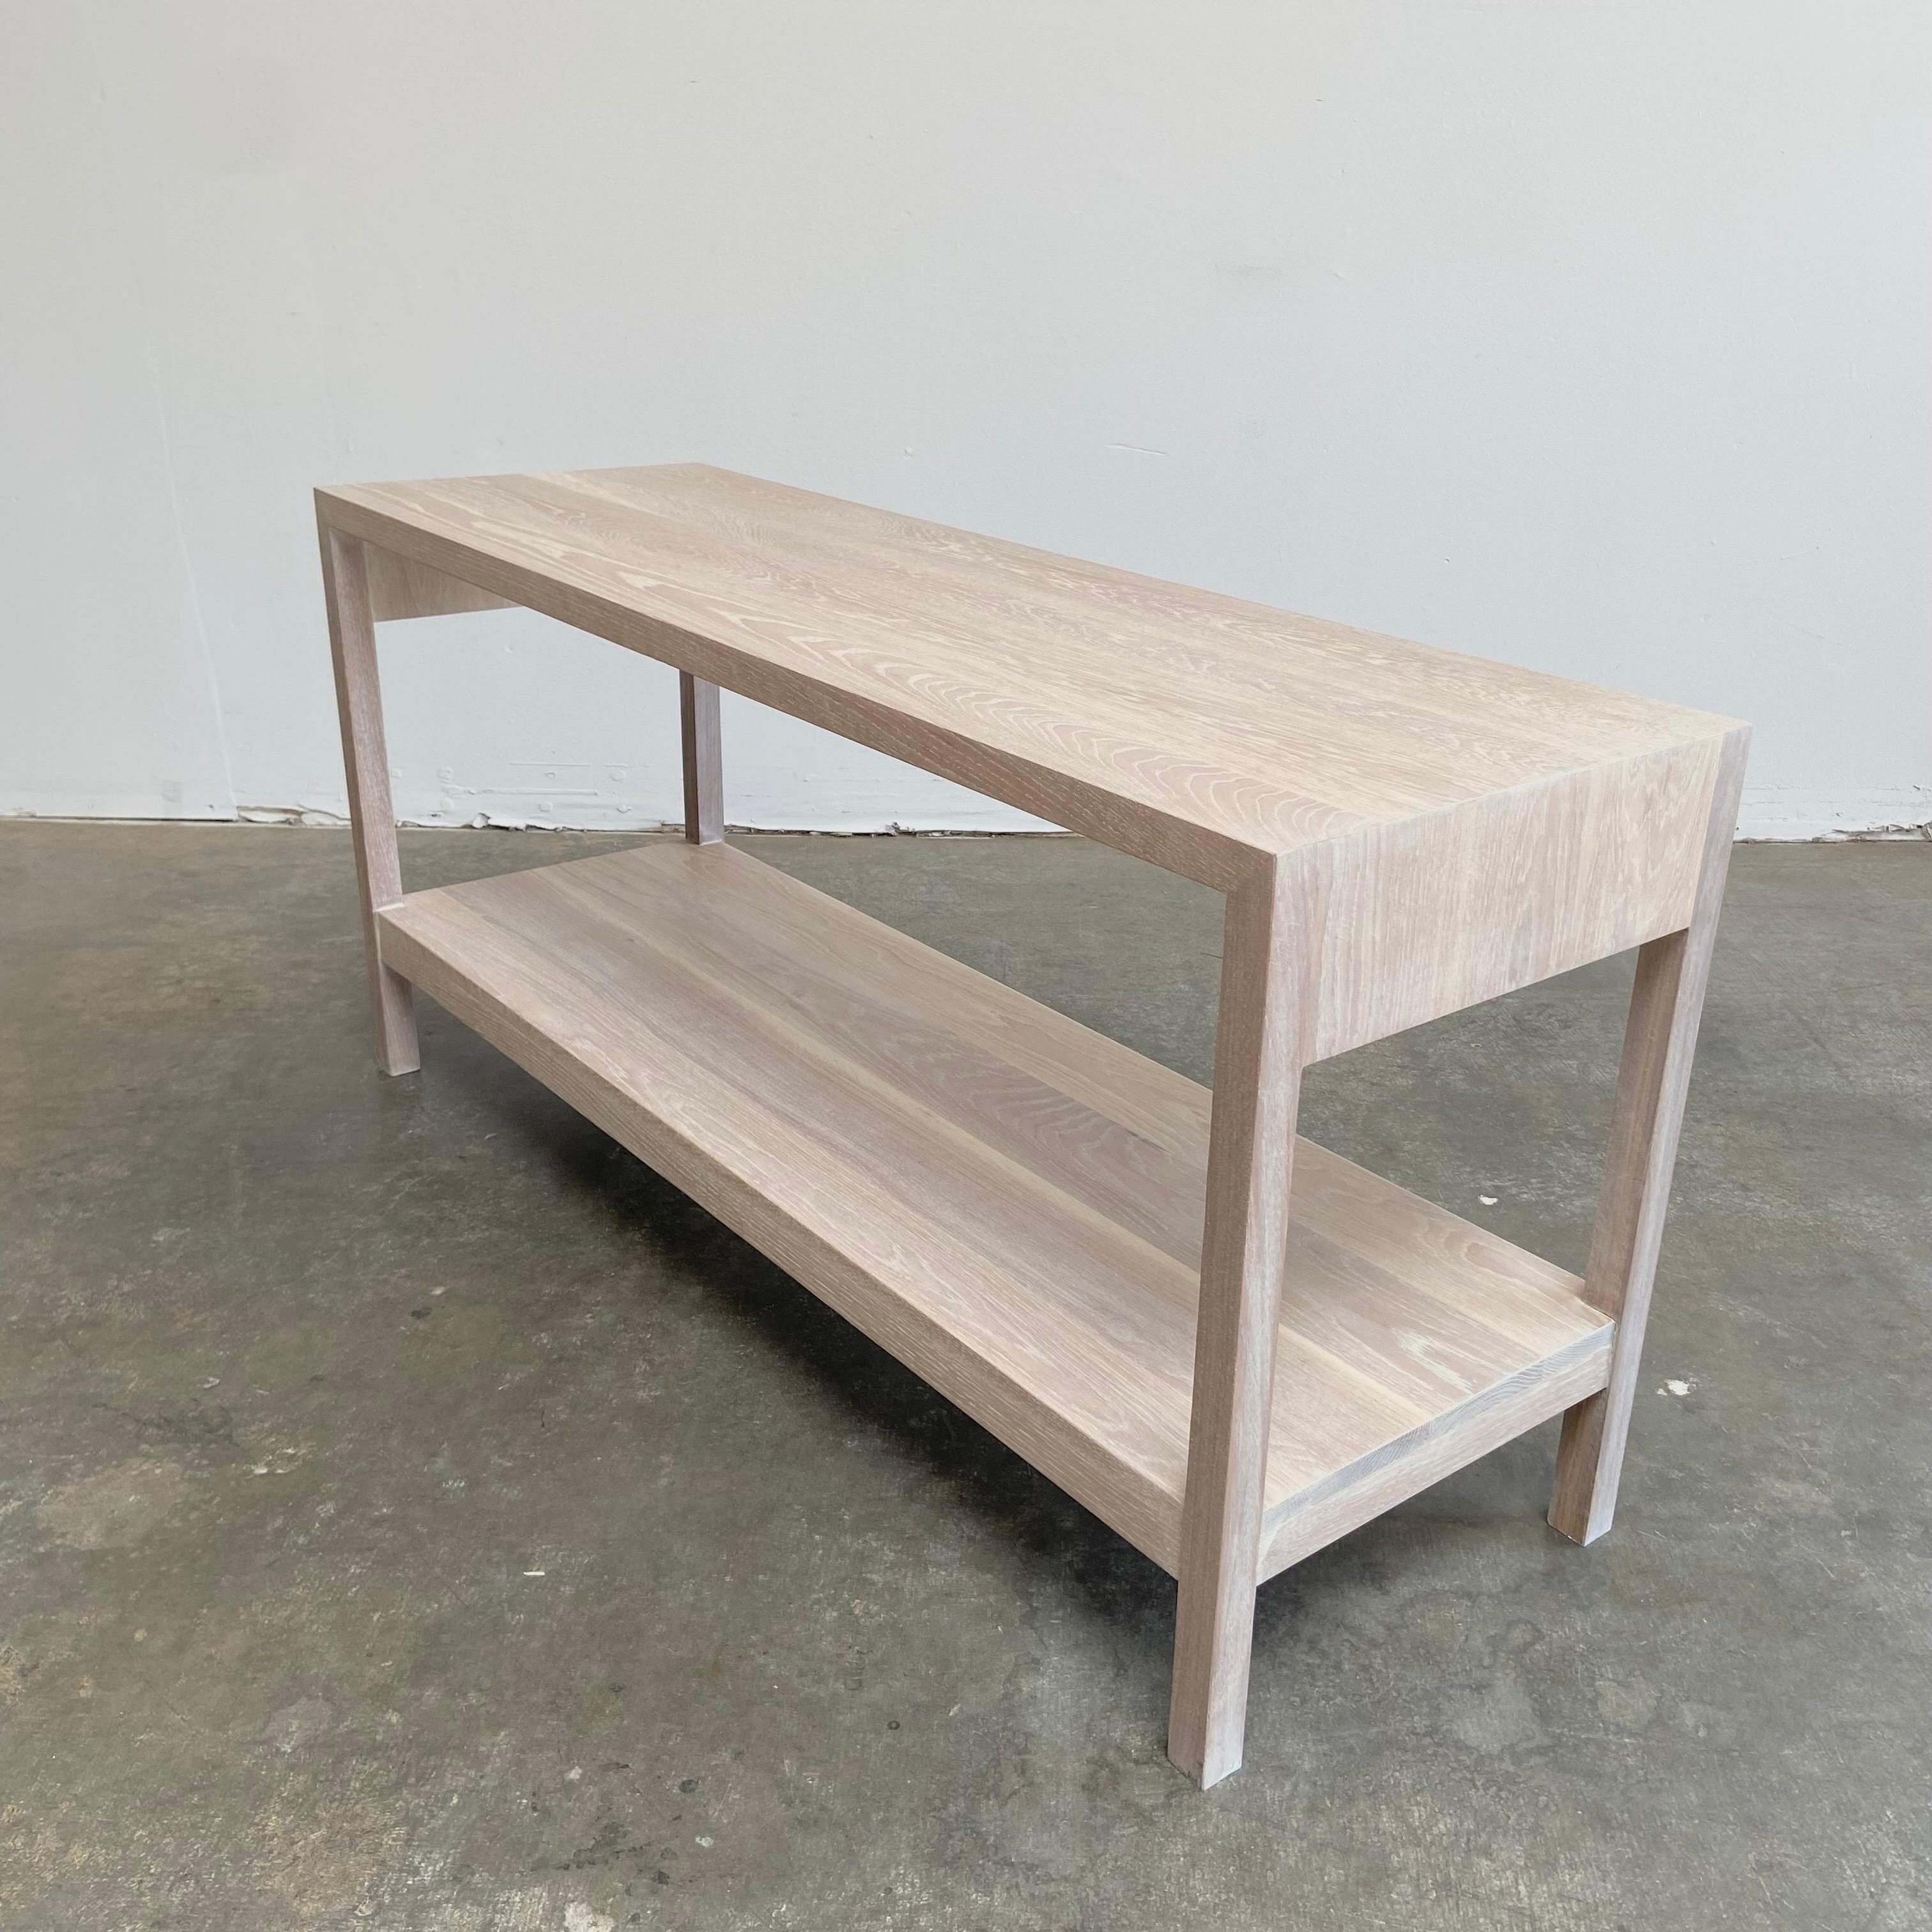 Custom white oak console table
Choose your finish and dimensions.
Shown in white oak #12 bleached.
Size :
54”W x 18”D x 26”H
Inside: 51-1/4”W x 18”D 16-3/4”H.